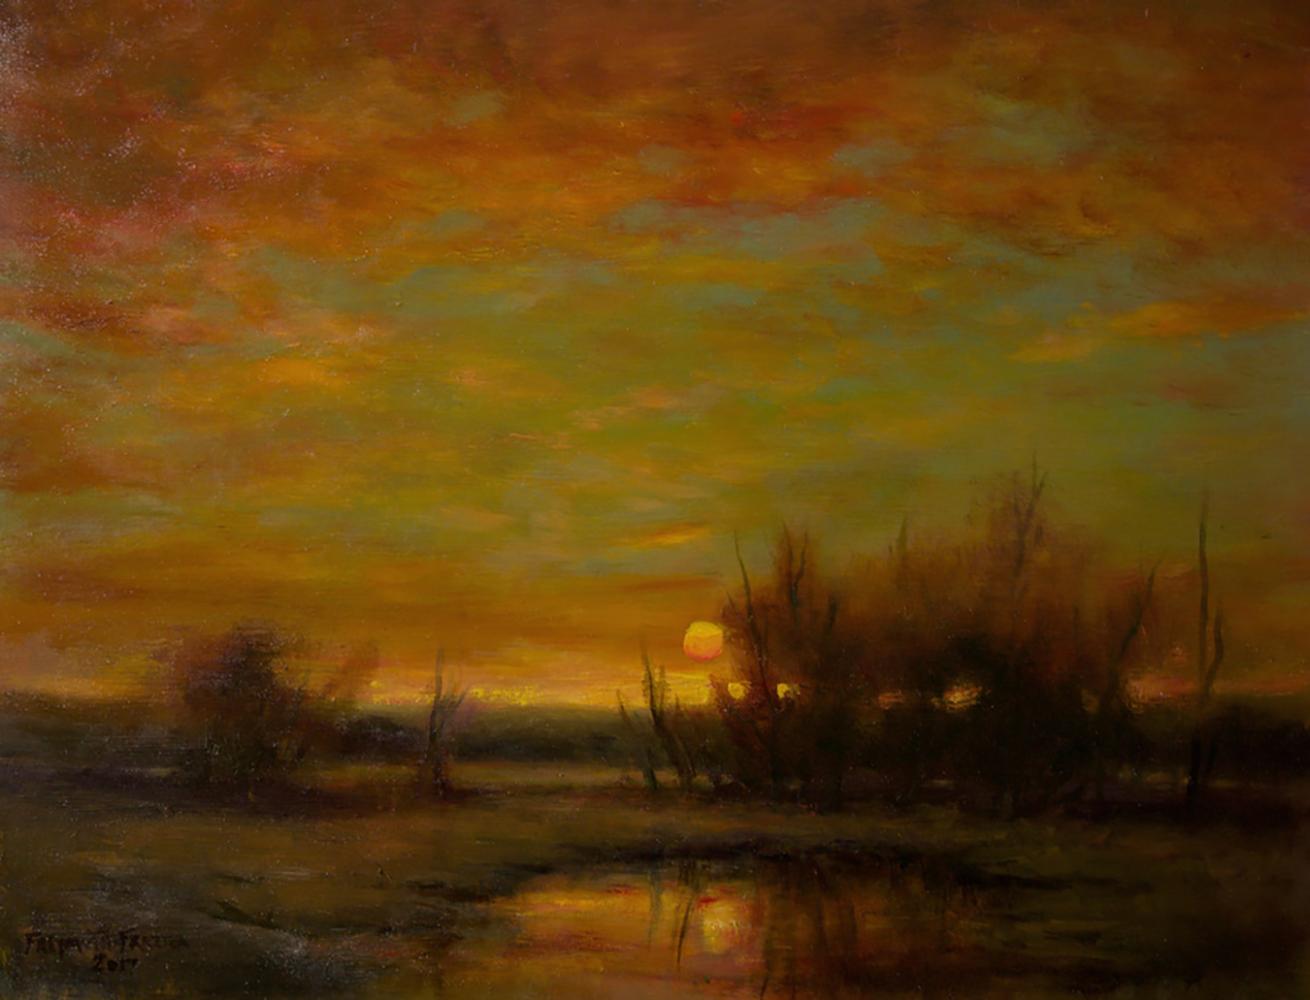 Rose Freymuth-Frazier Landscape Painting - Blood Moon  - Original Oil Painting with Soft Light Reflecting Romantic Colors